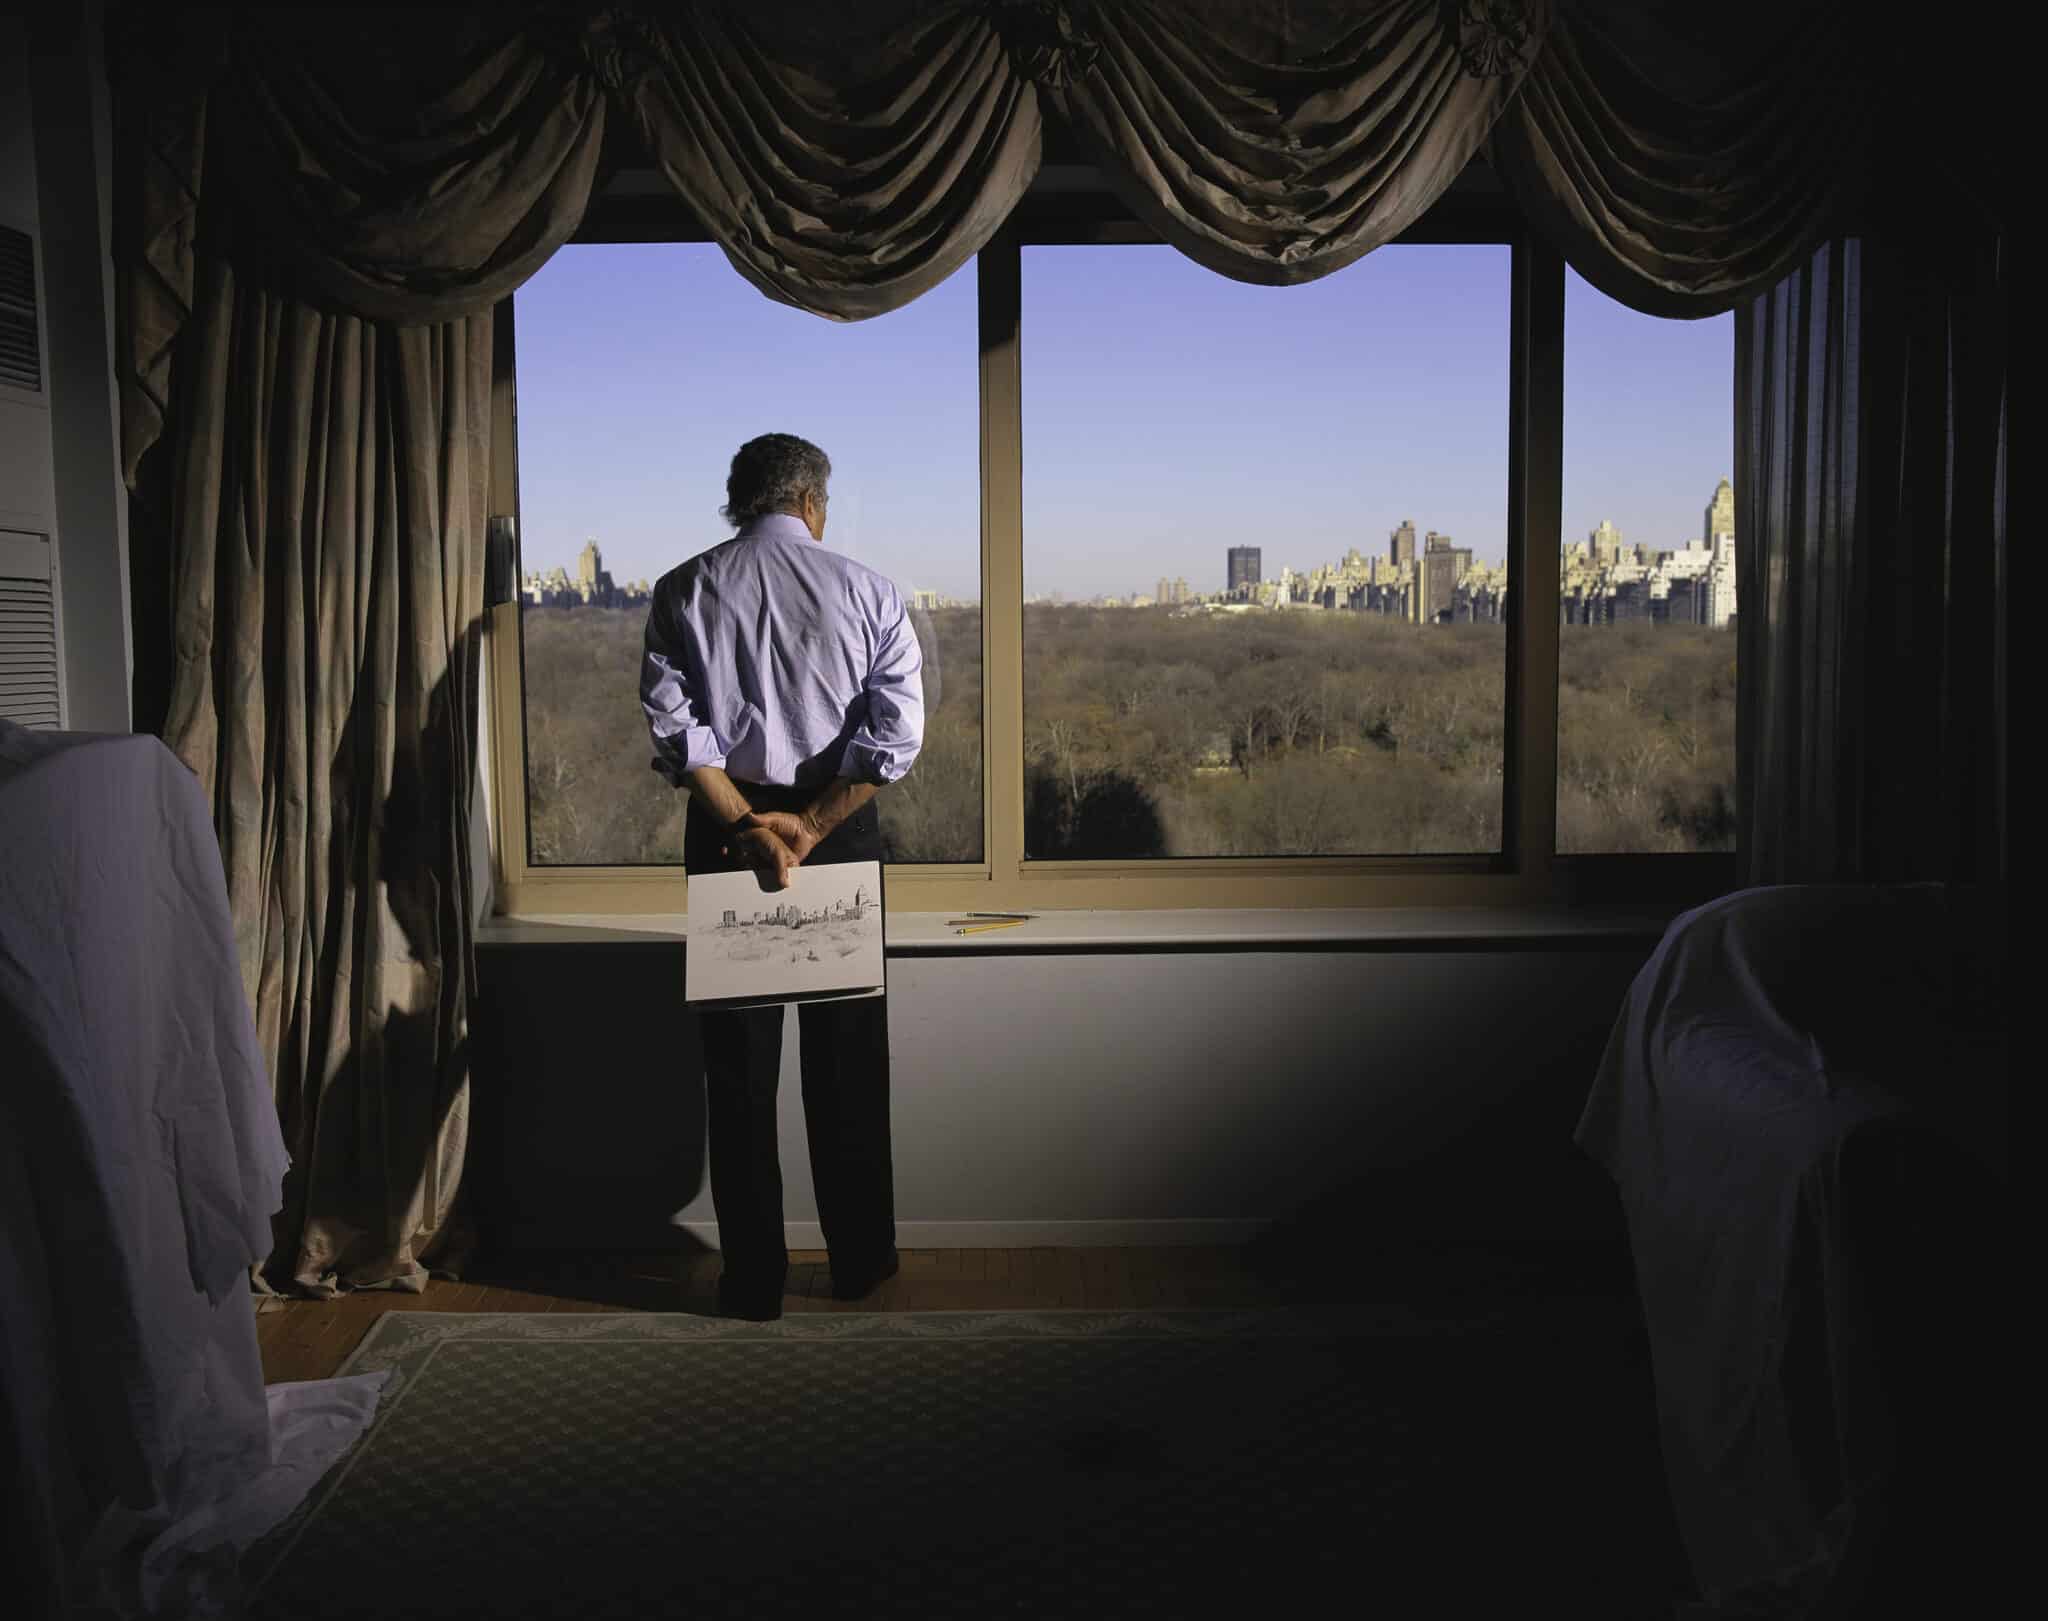 Tony Bennett looking out his apartment window overlooking Central Park in NYC